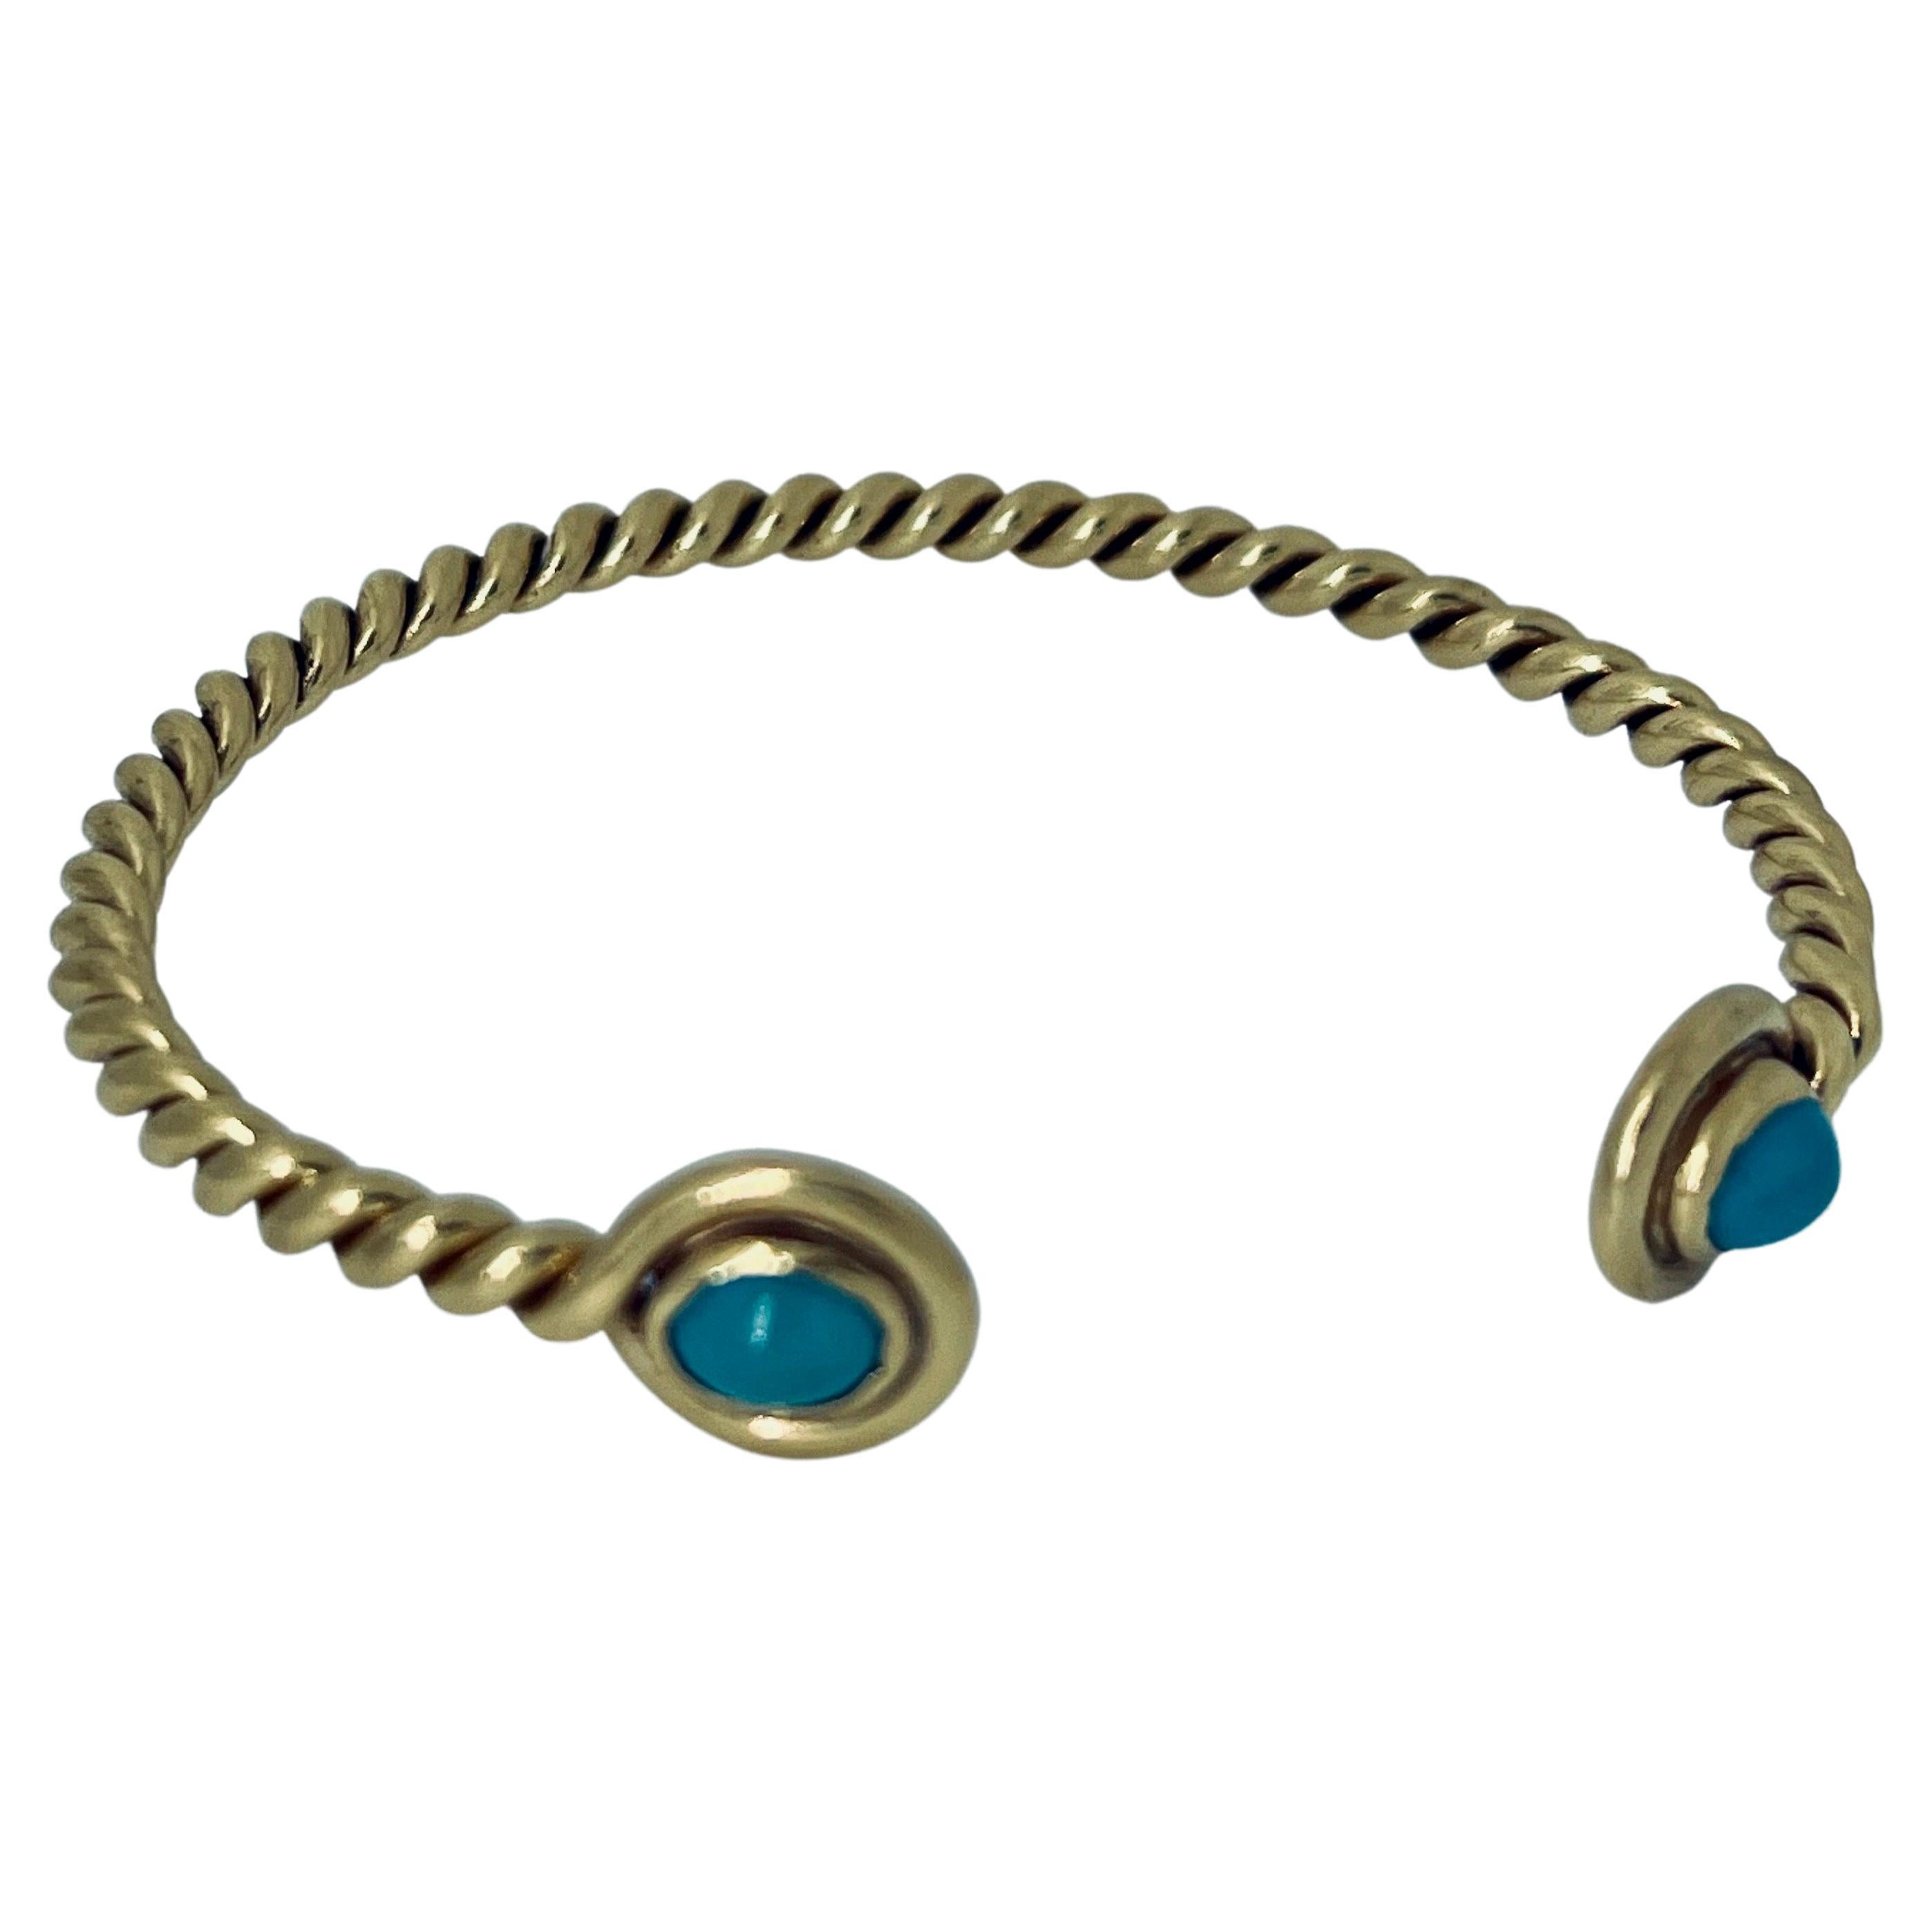 18 Carat Gold and Turquoise Bangle Bracelet, 16cm Circumference, circa 1970s For Sale